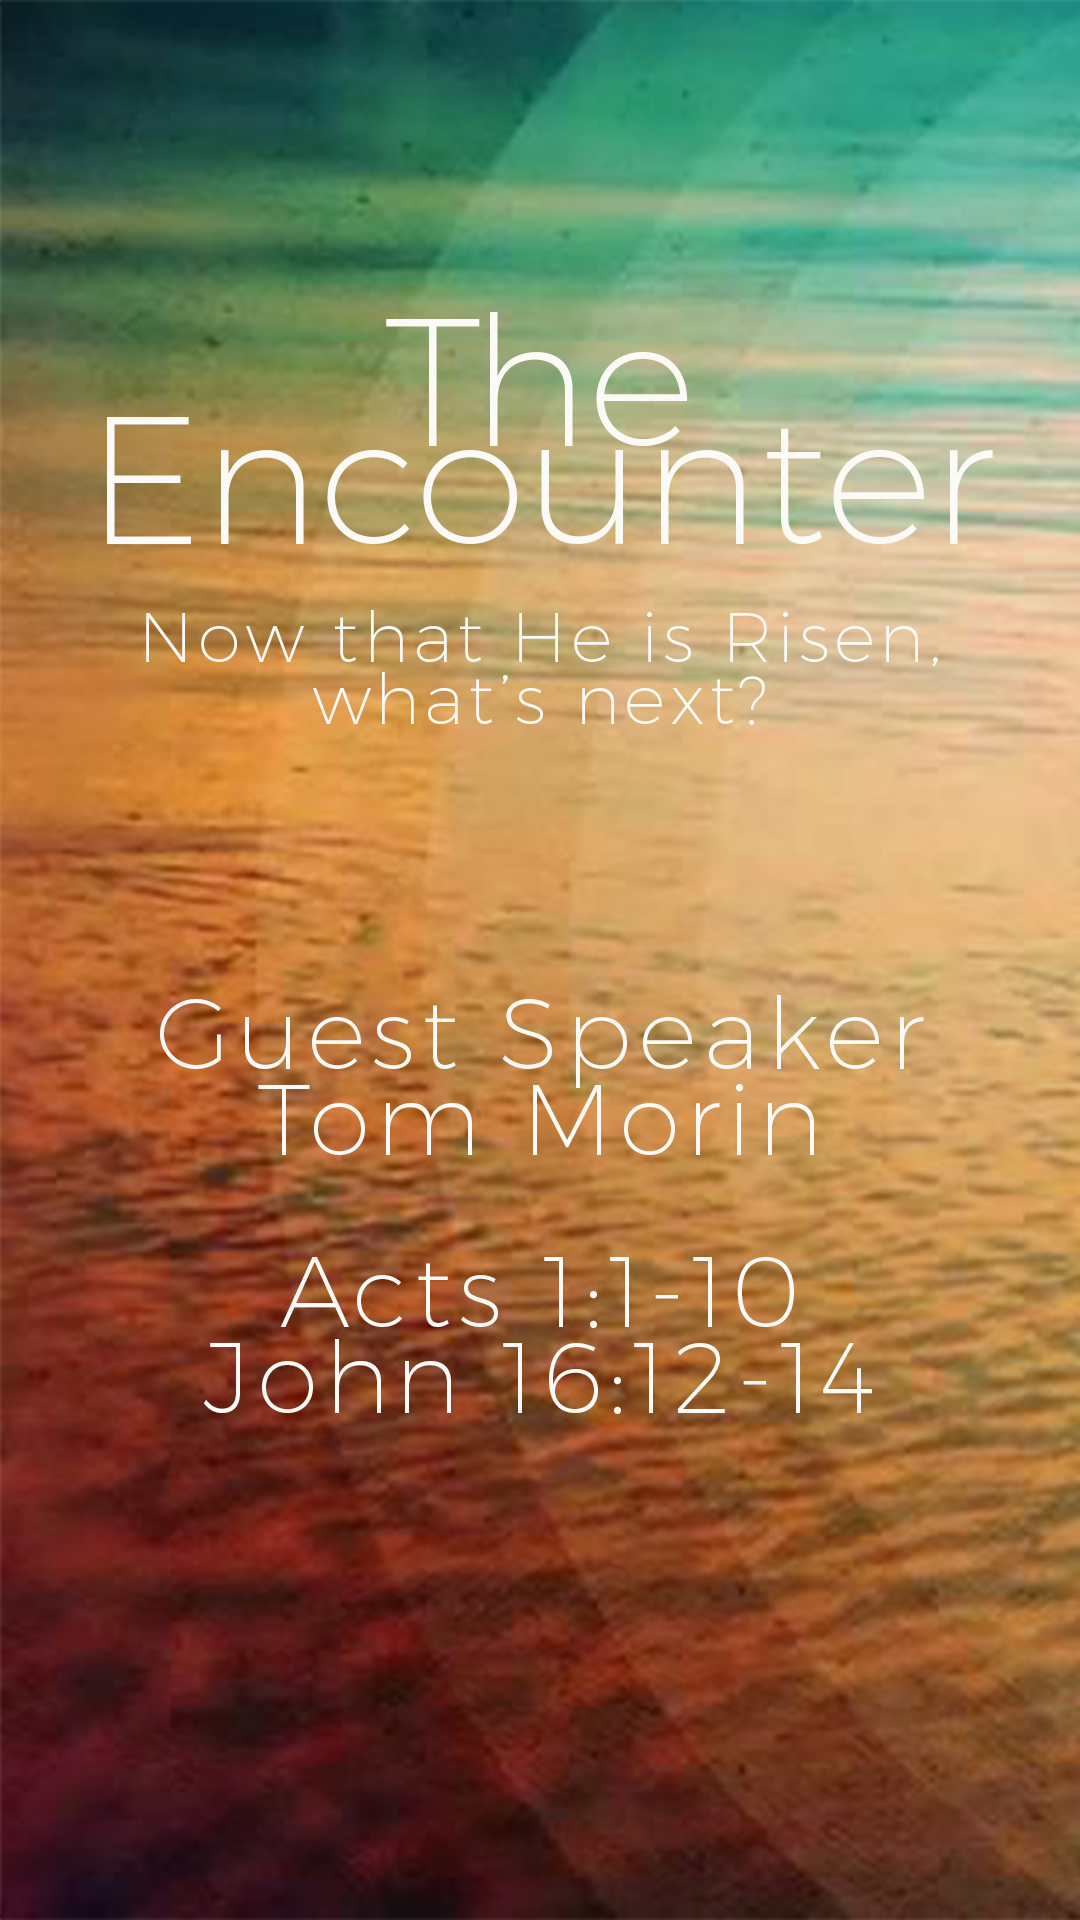 THE ENCOUNTER: Now that He is Risen, what’s next?